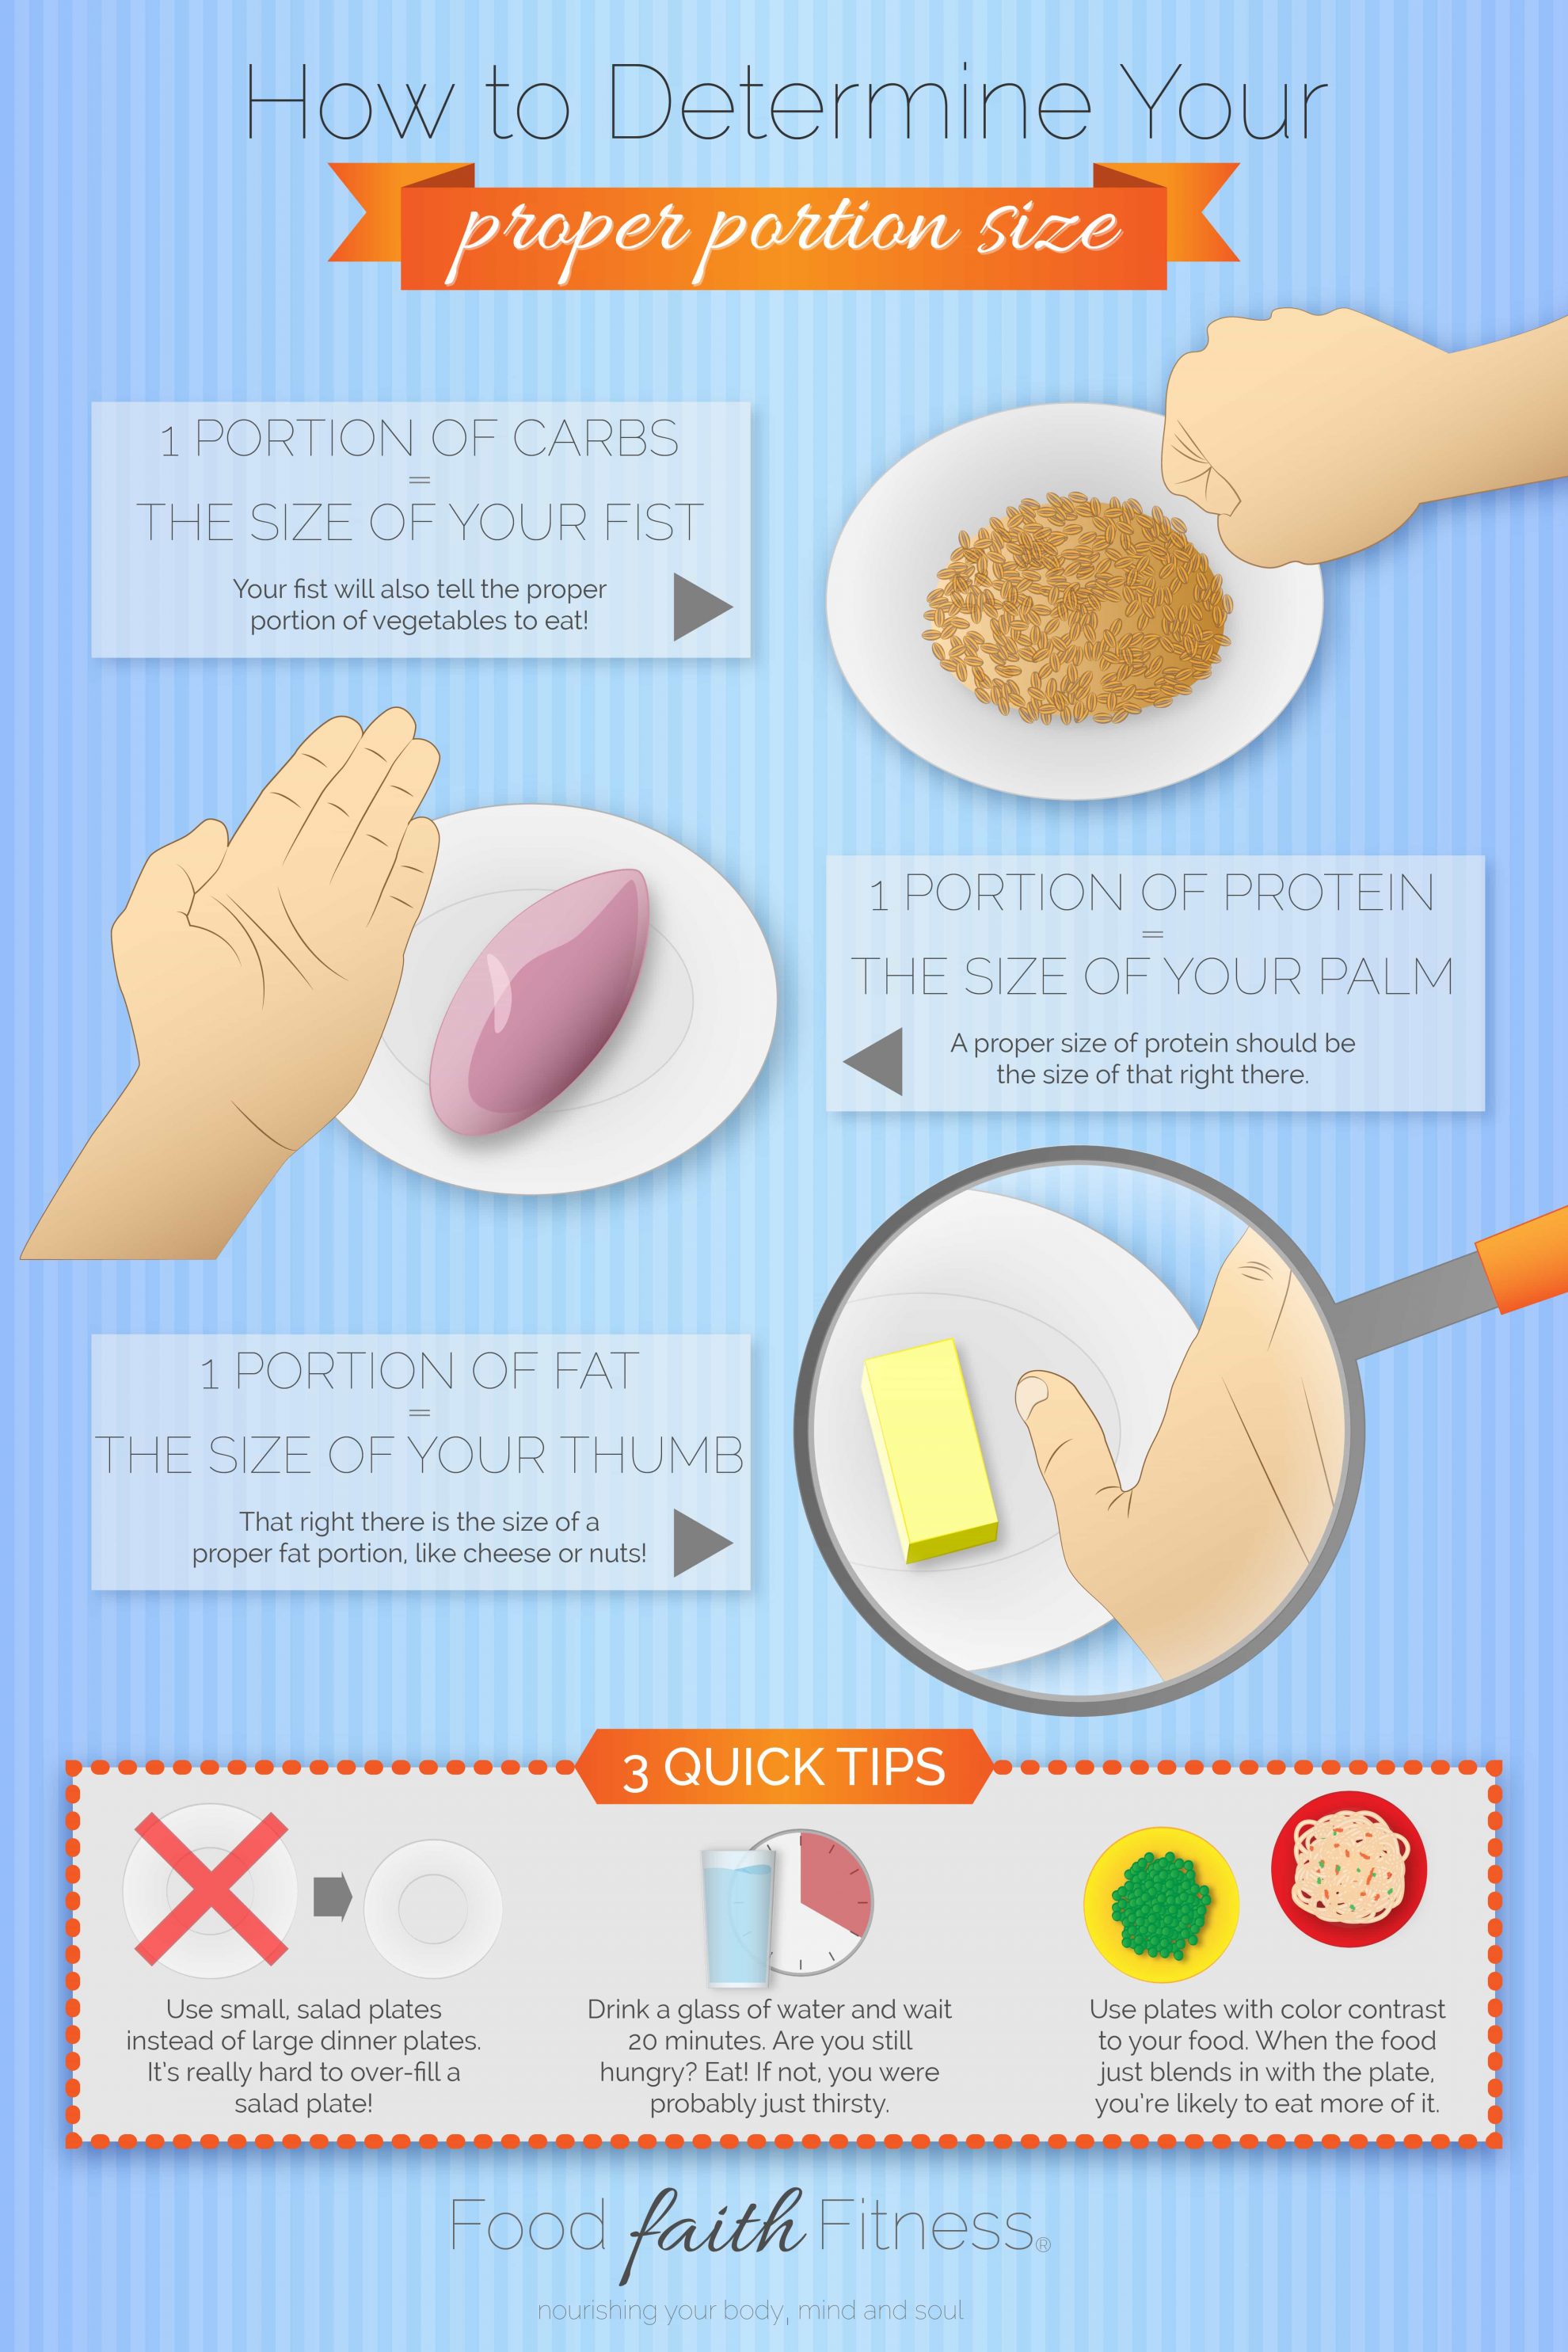 Top Tips for Portion Control - Ever wondered how to measure portion size or how to control your eating? I'm sharing my easy top tips for portion control! | Foodfaithfitness.com | @FoodFaithFit